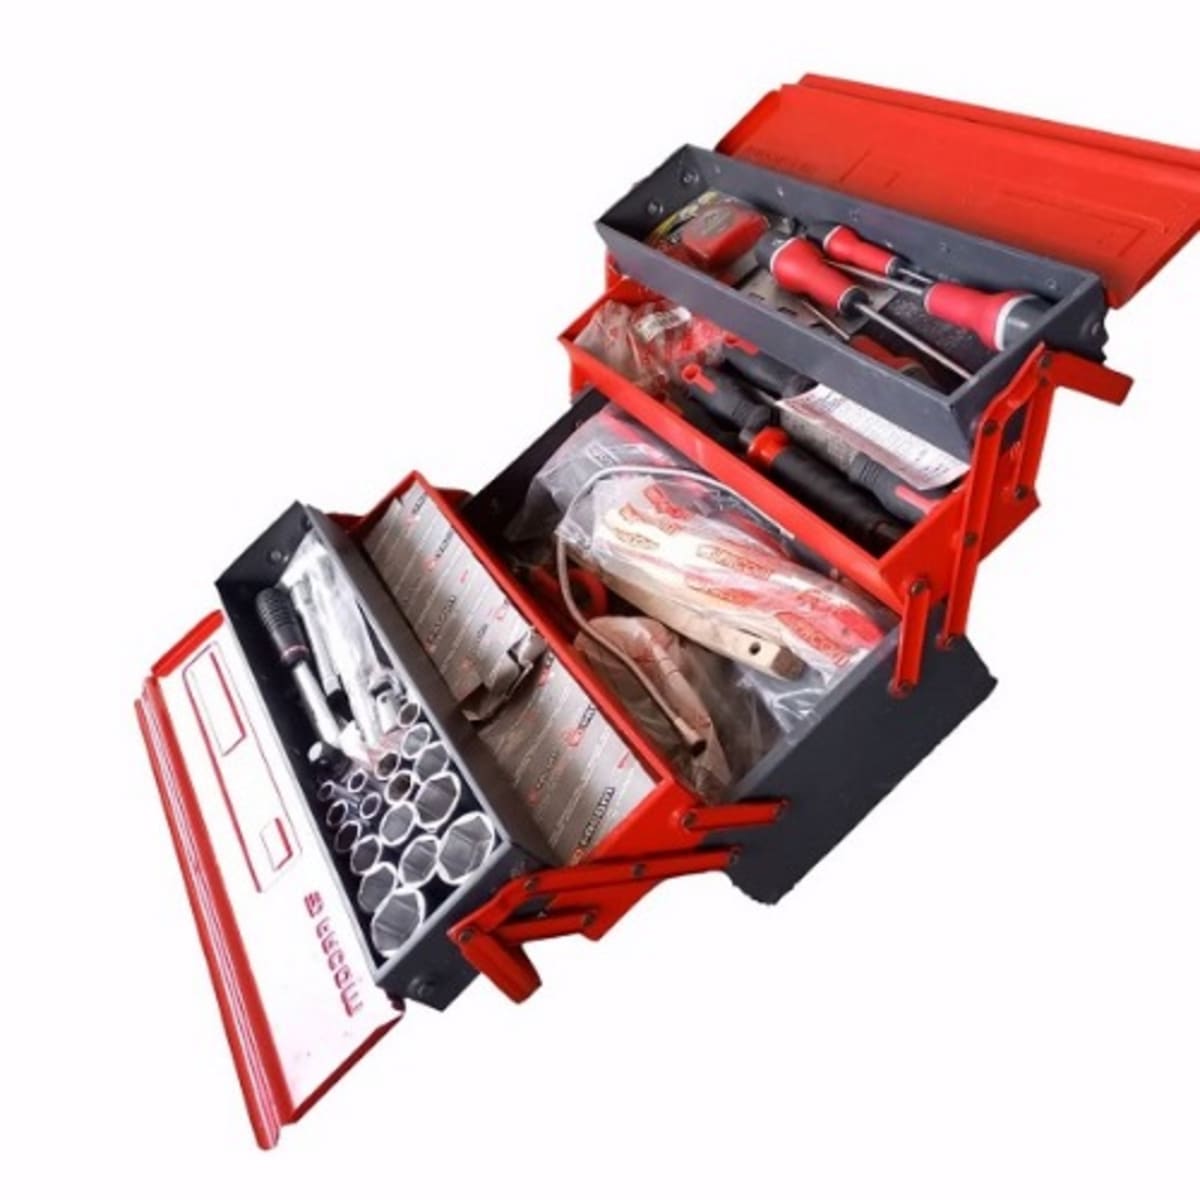 Mechanic's Hand Tools Box Set In Case With 12 Points Sockets